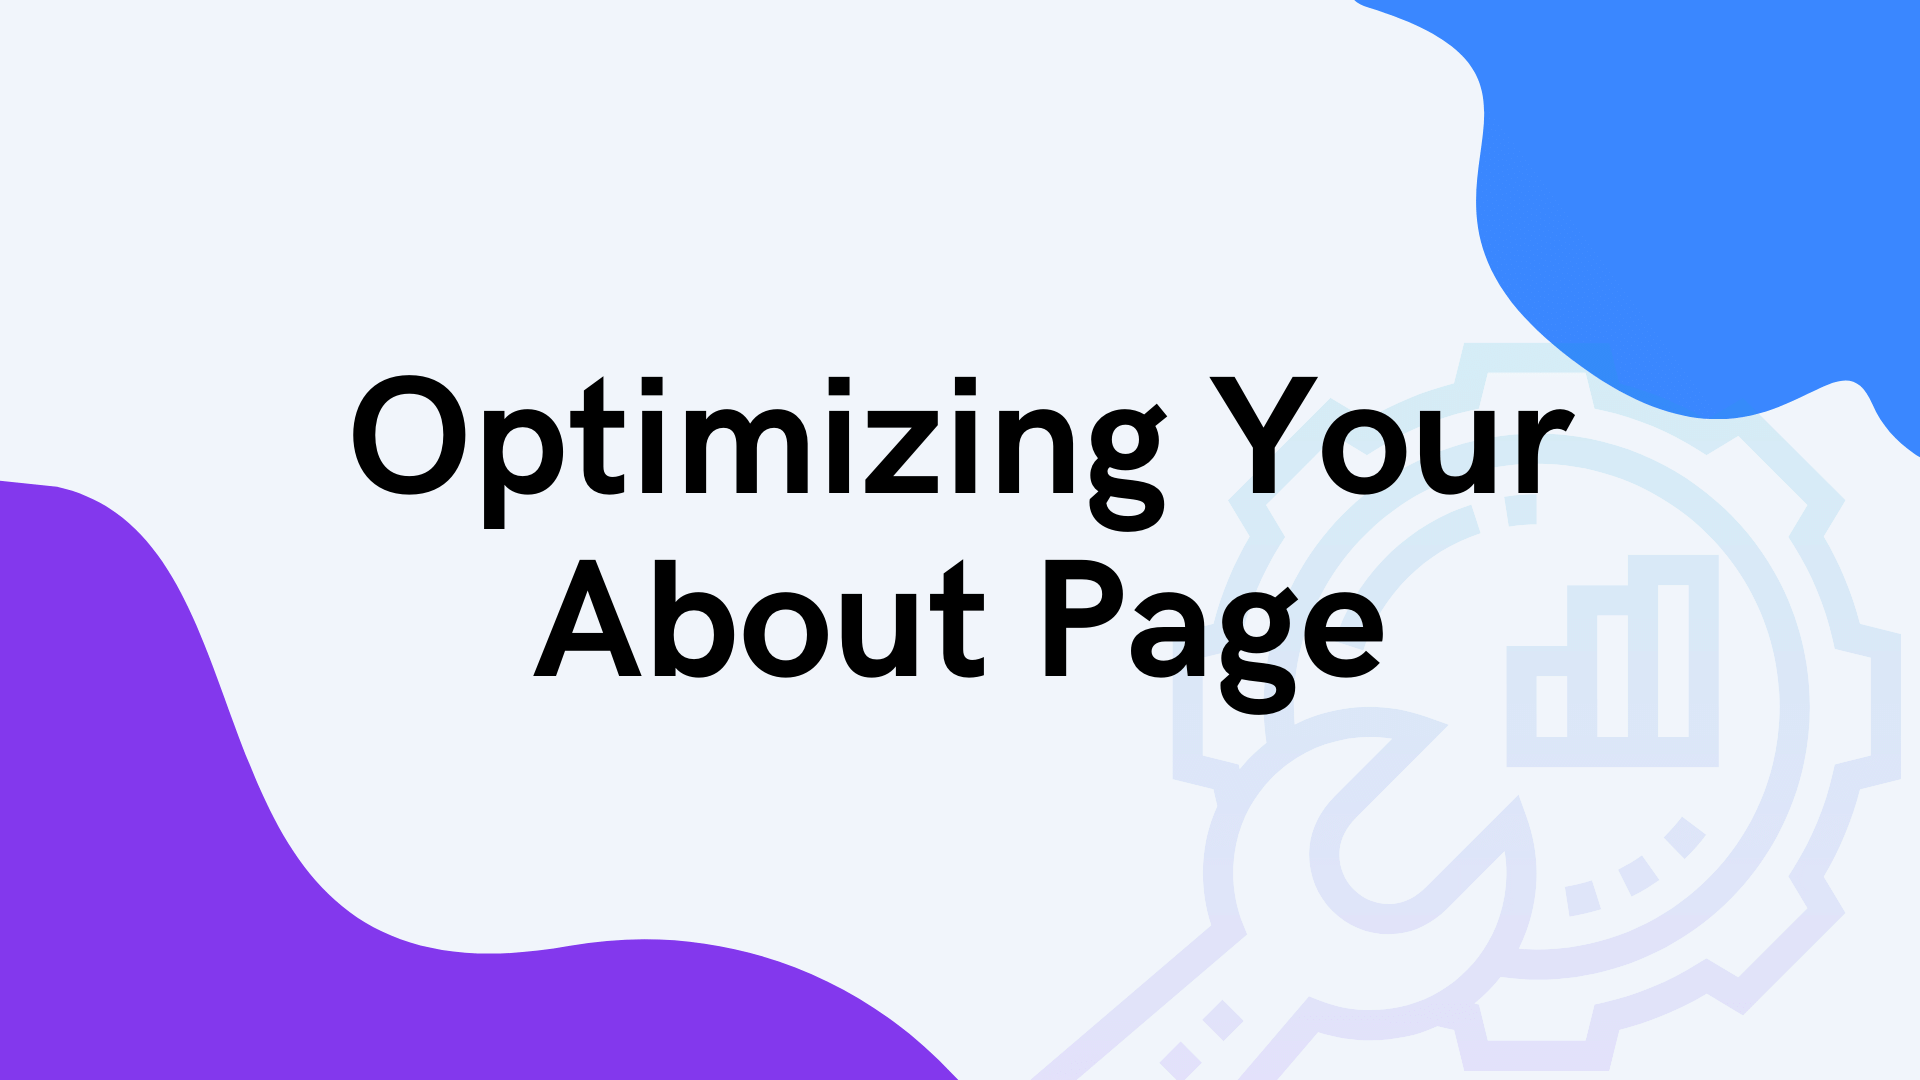 Optimizing your About page for SEO